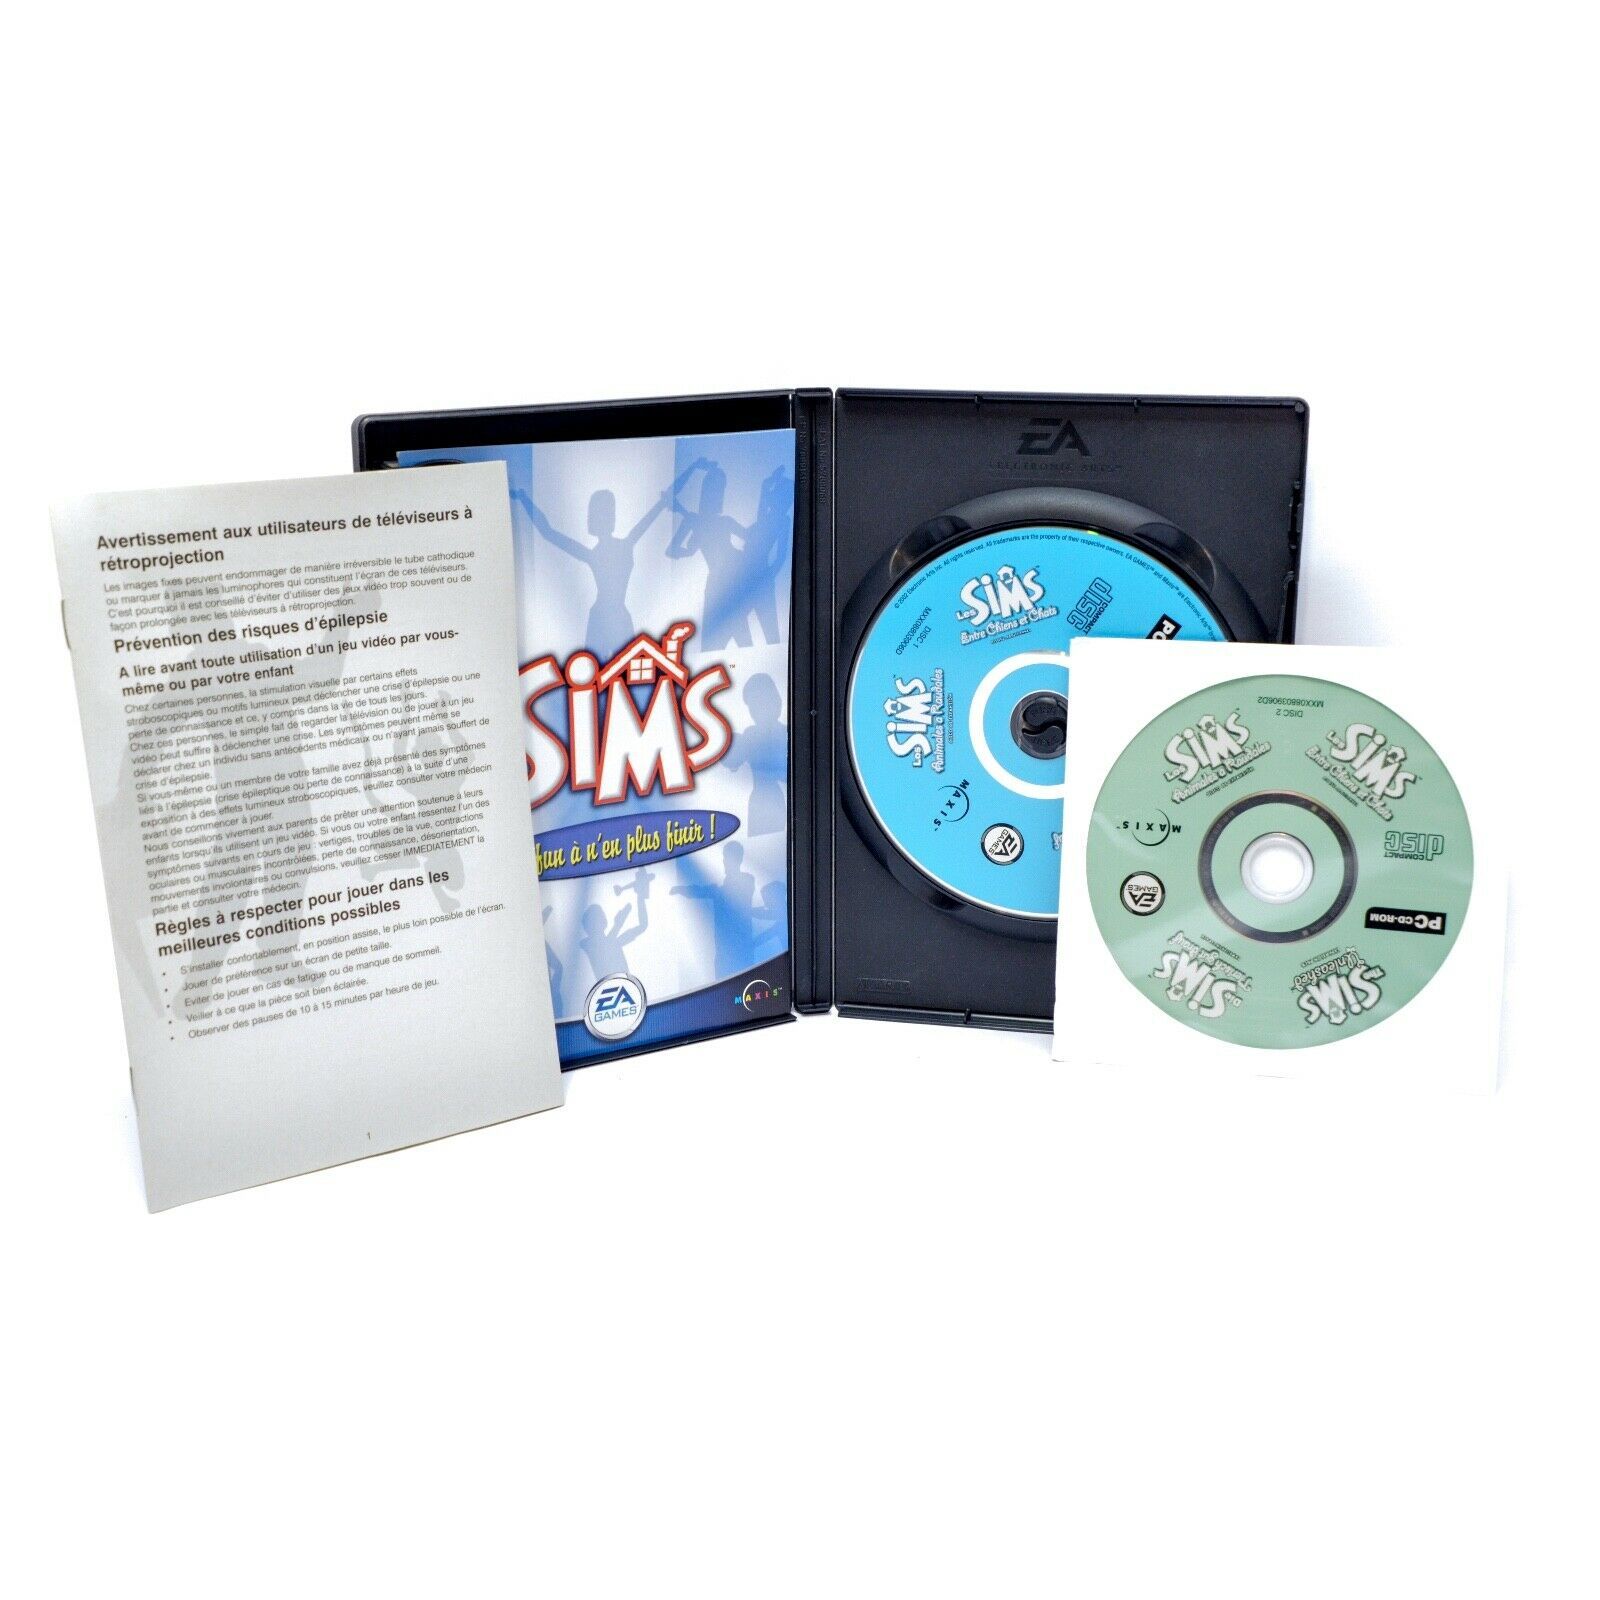 PC Cd-Rom Les Sims Entre Chiens et Chats and 50 similar items